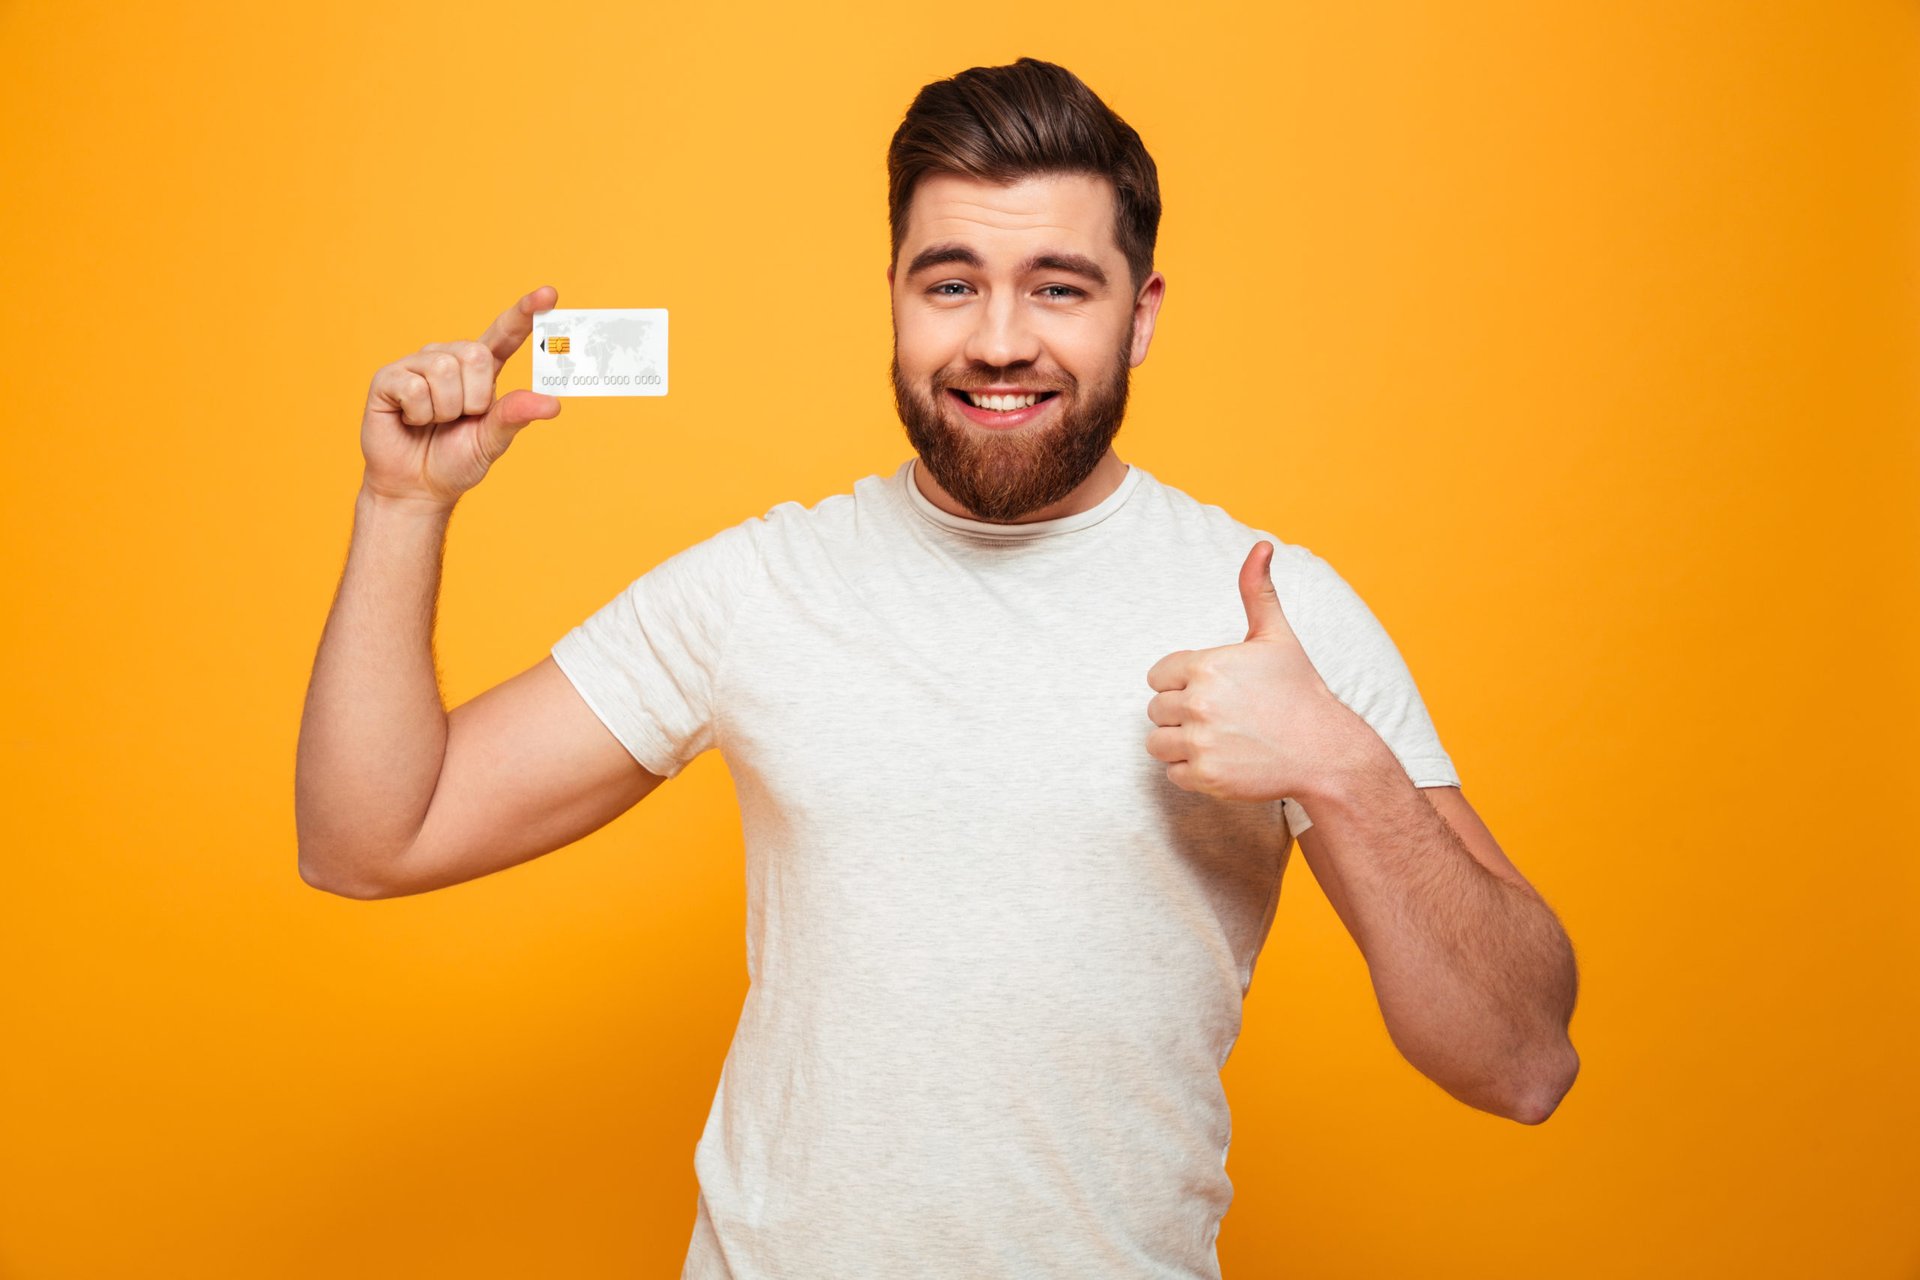 The 6 Best Credit Cards for March 2021